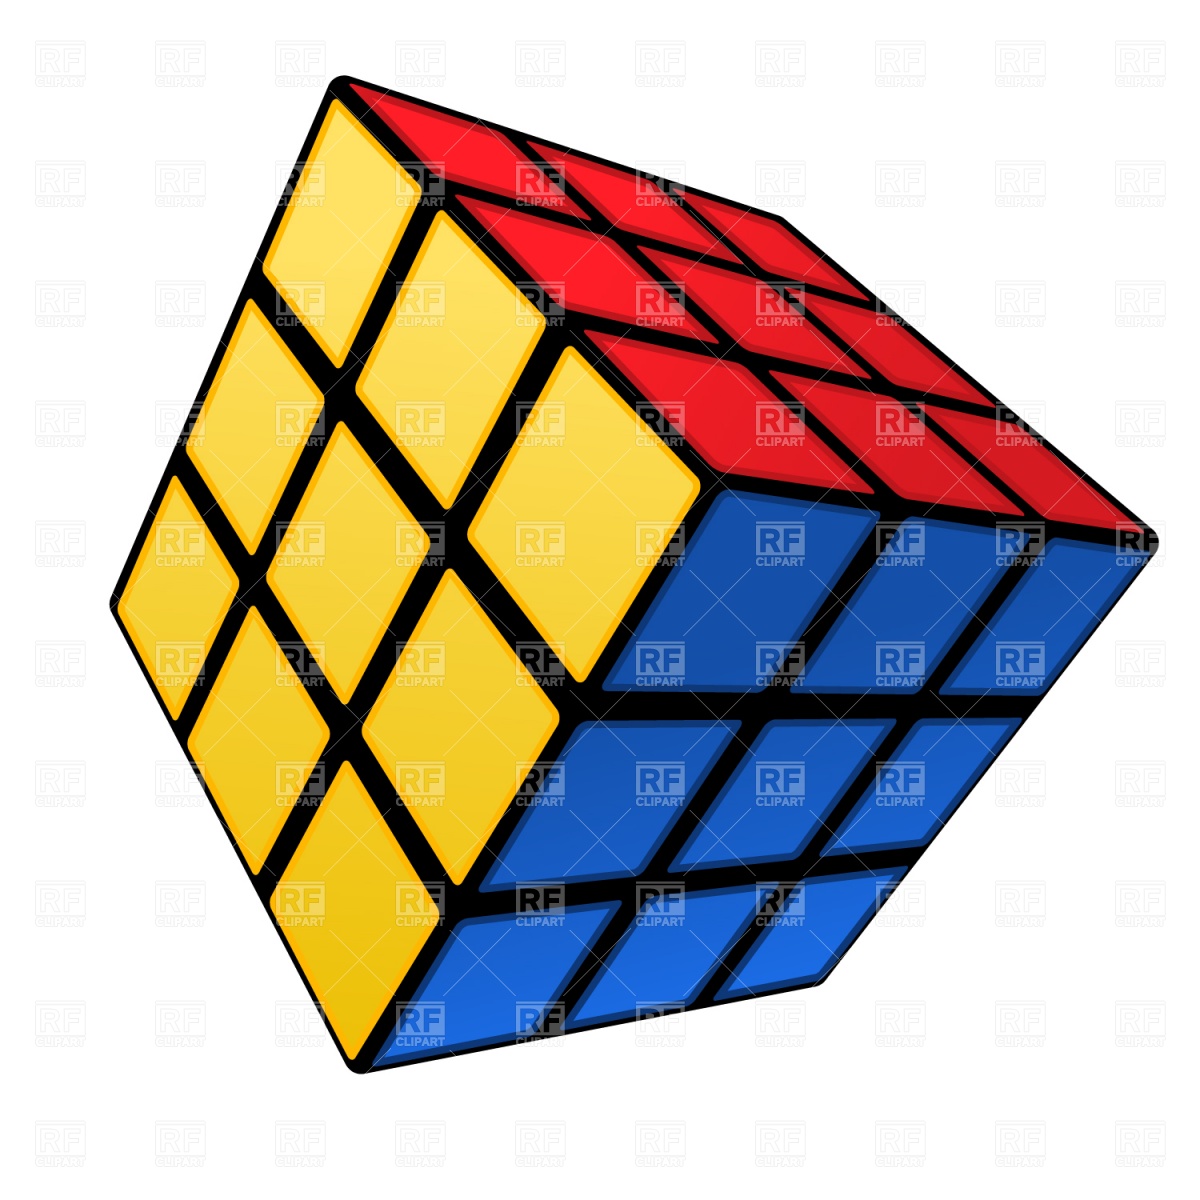 Rubik S Cube 1582 Objects Download Royalty Free Vector Clip Art